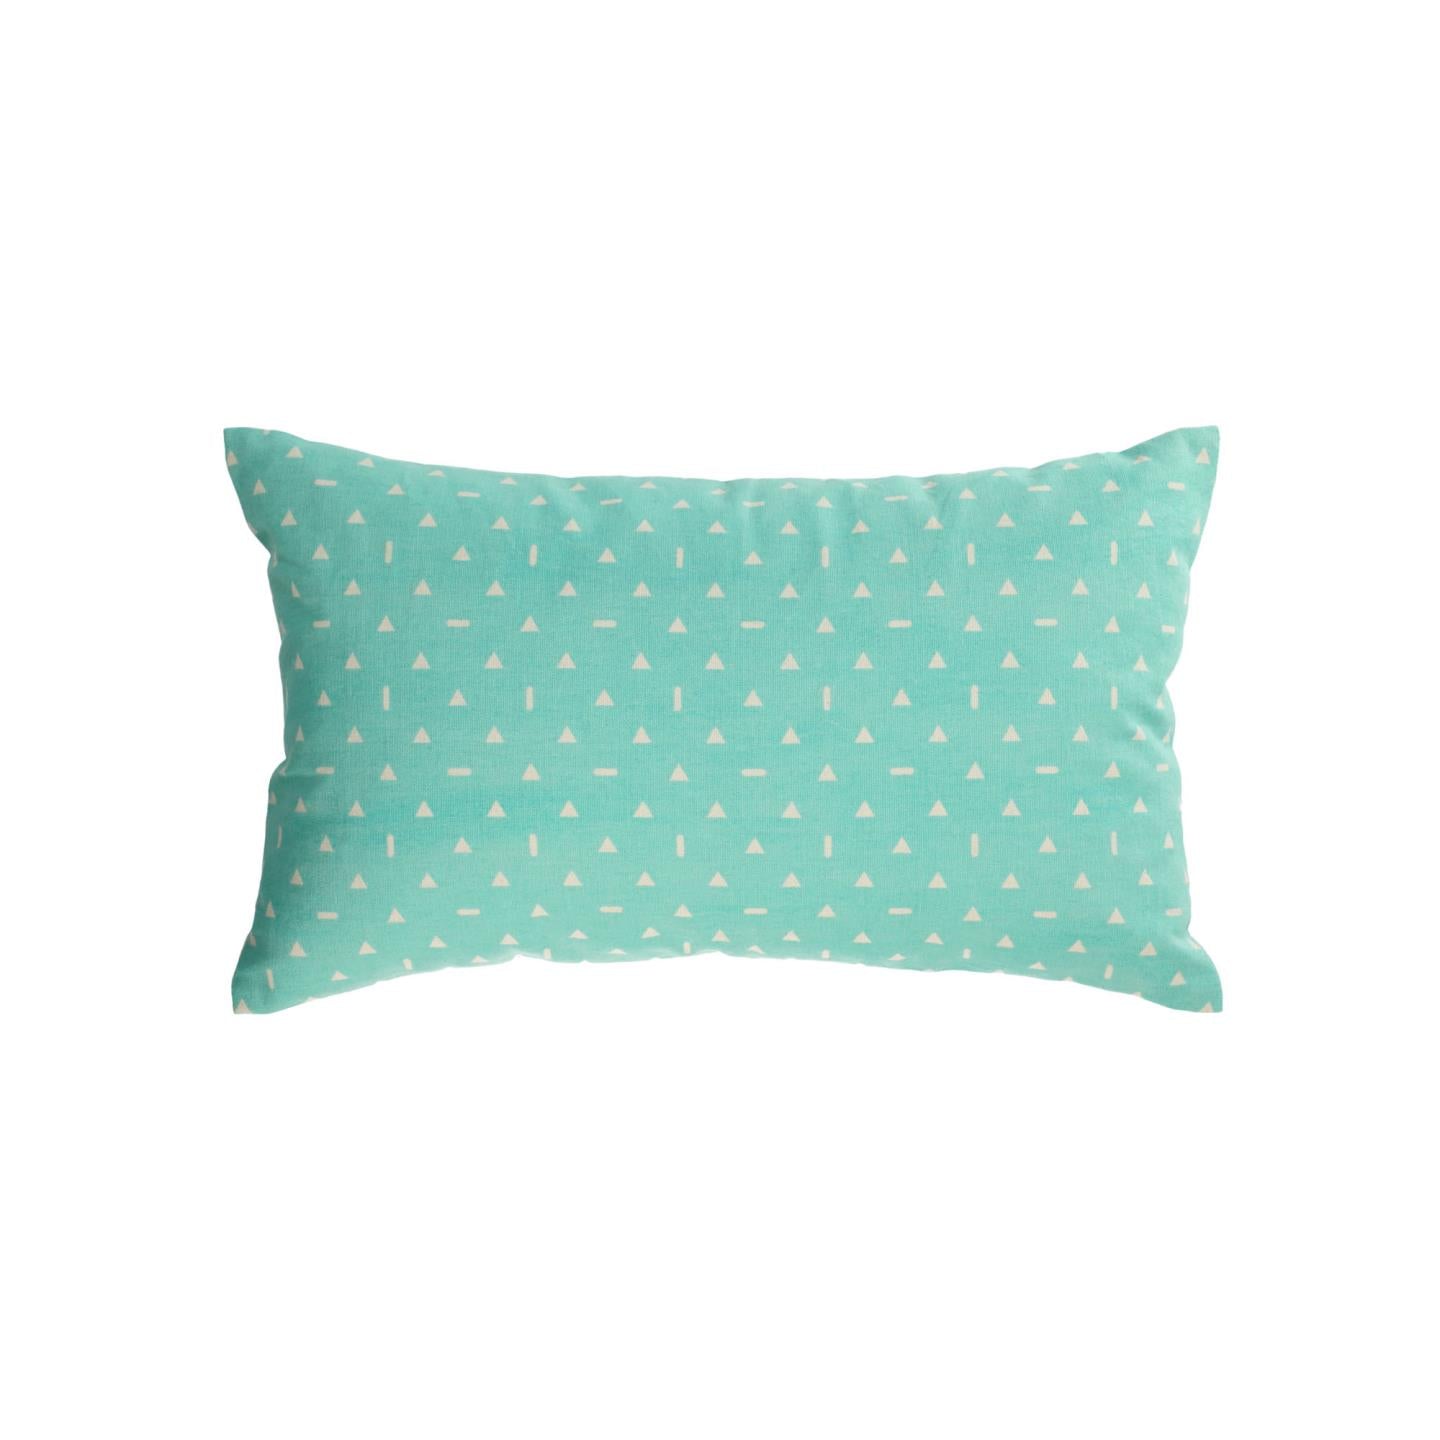 Zale 100% cotton cushion cover in turquoise with white triangles 30 x 50 cm